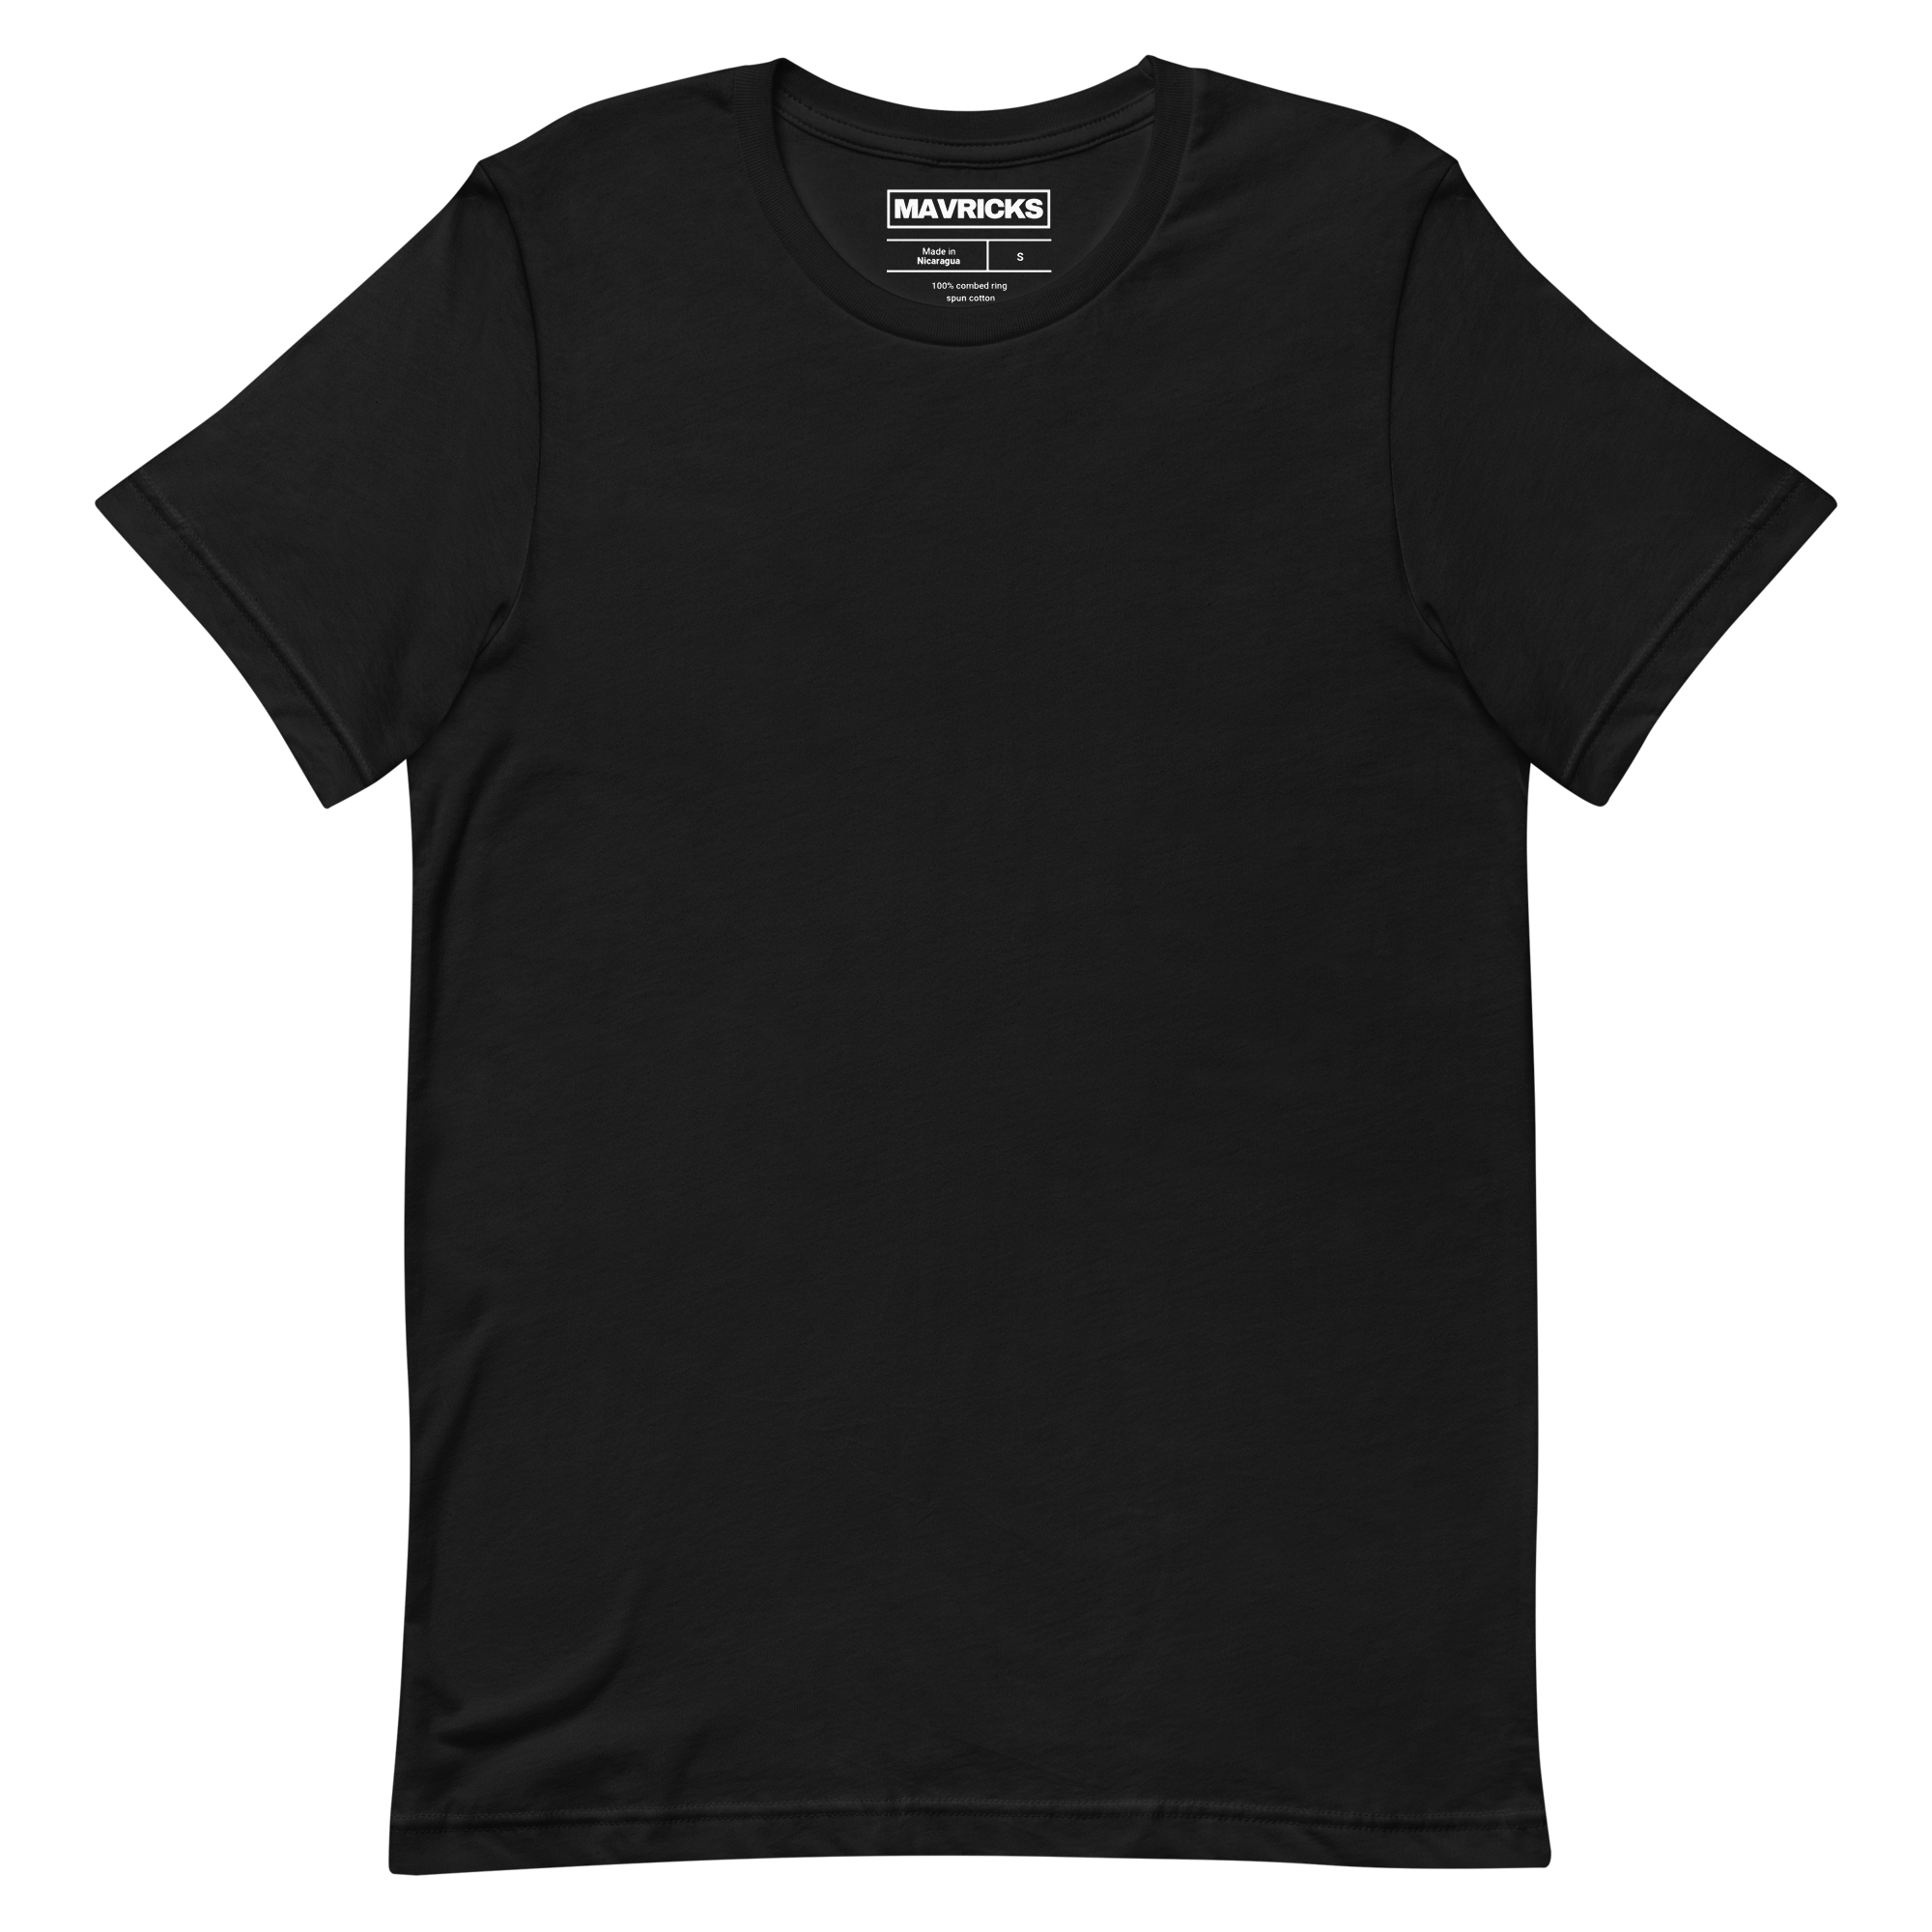 Everyday T-Shirt 3-Pack